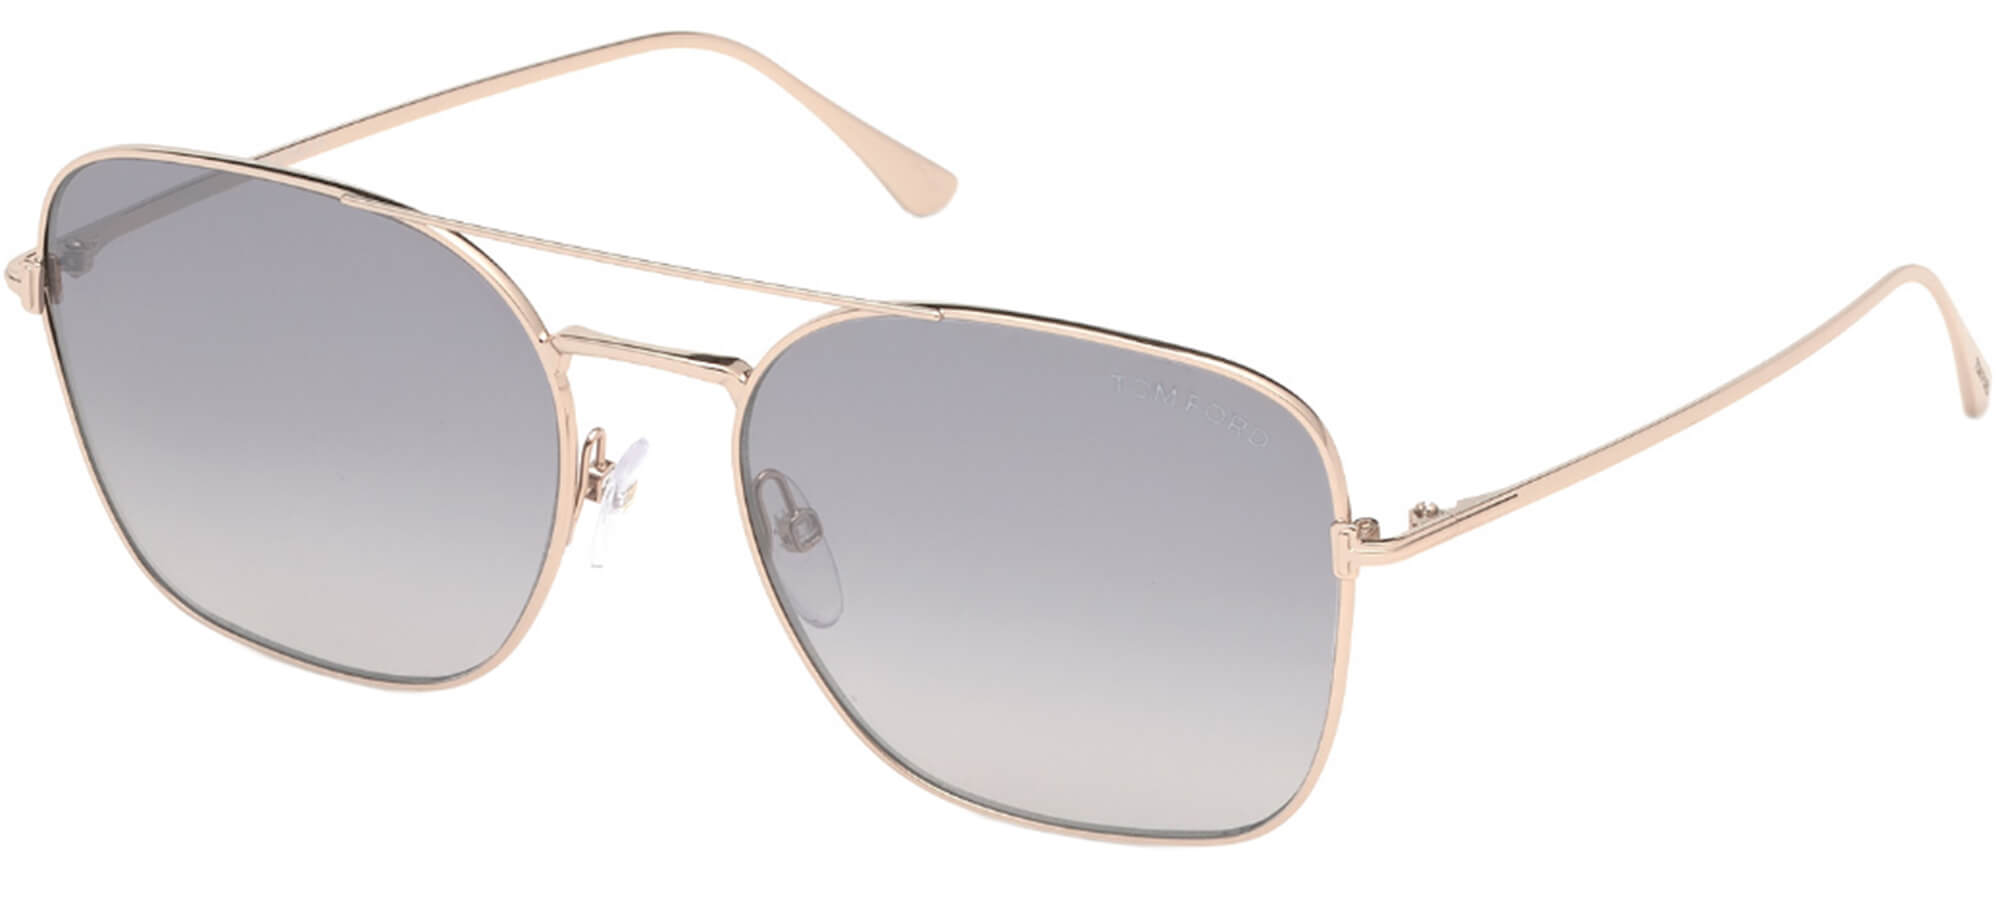 Tom FordDYLAN-02 FT 0680Rose Gold/grey Shaded (28C A)